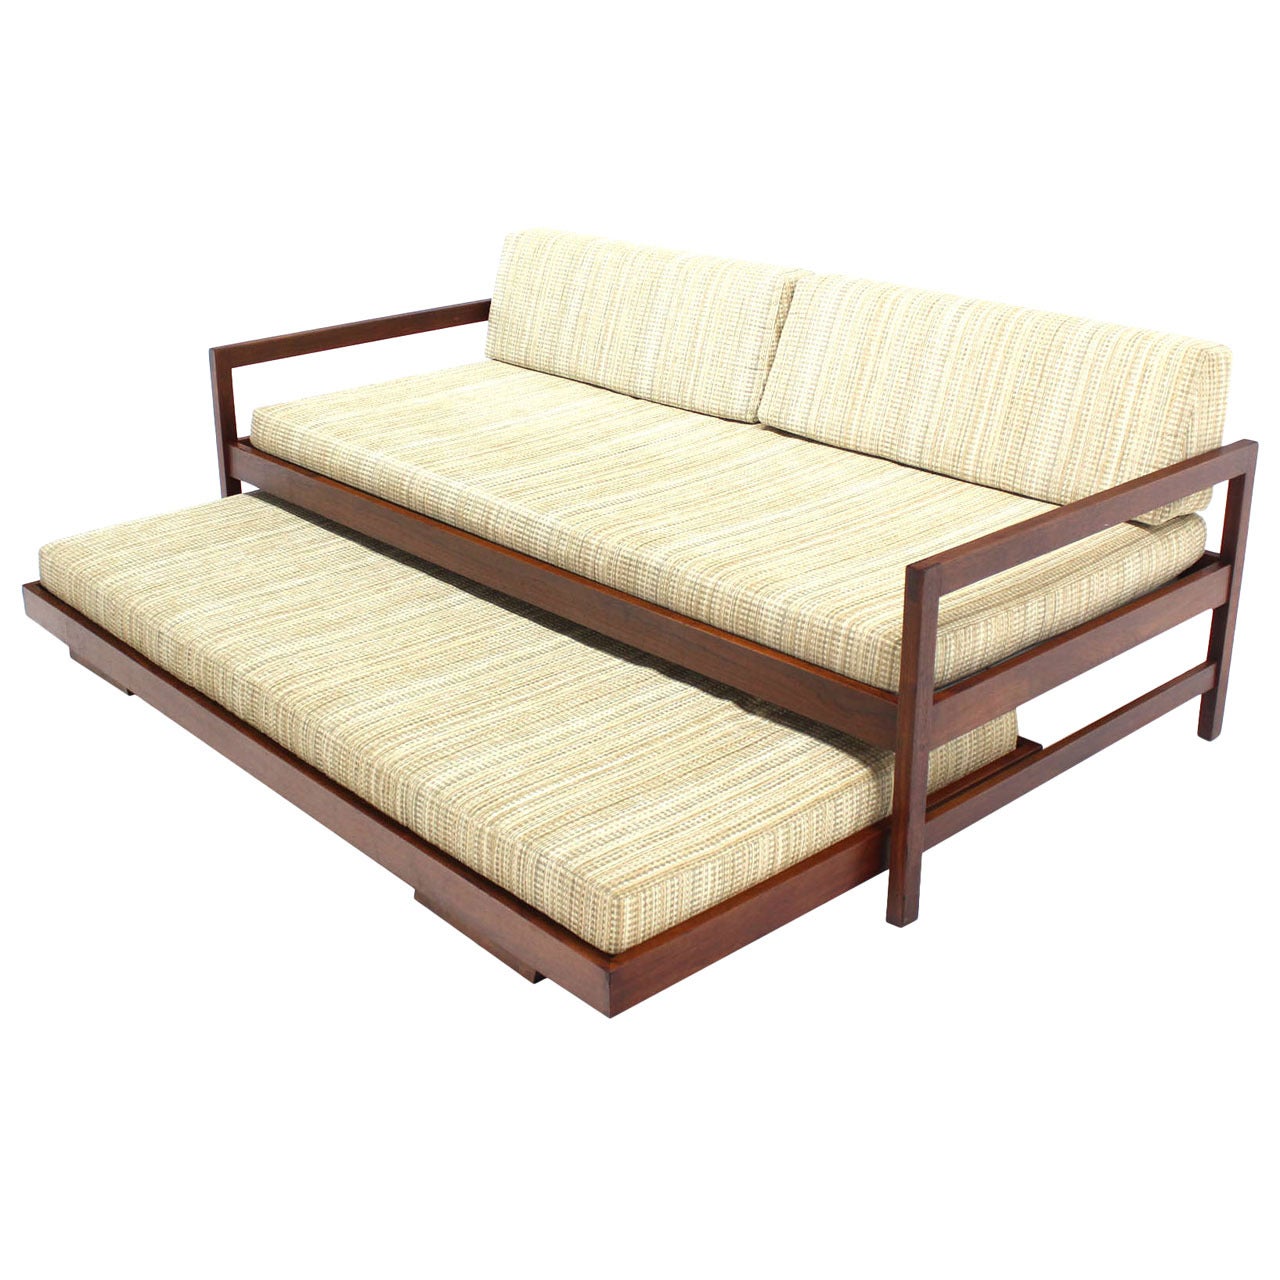 Solid Walnut Frame Mid-Century Modern Trundle, Pull-Out Daybed